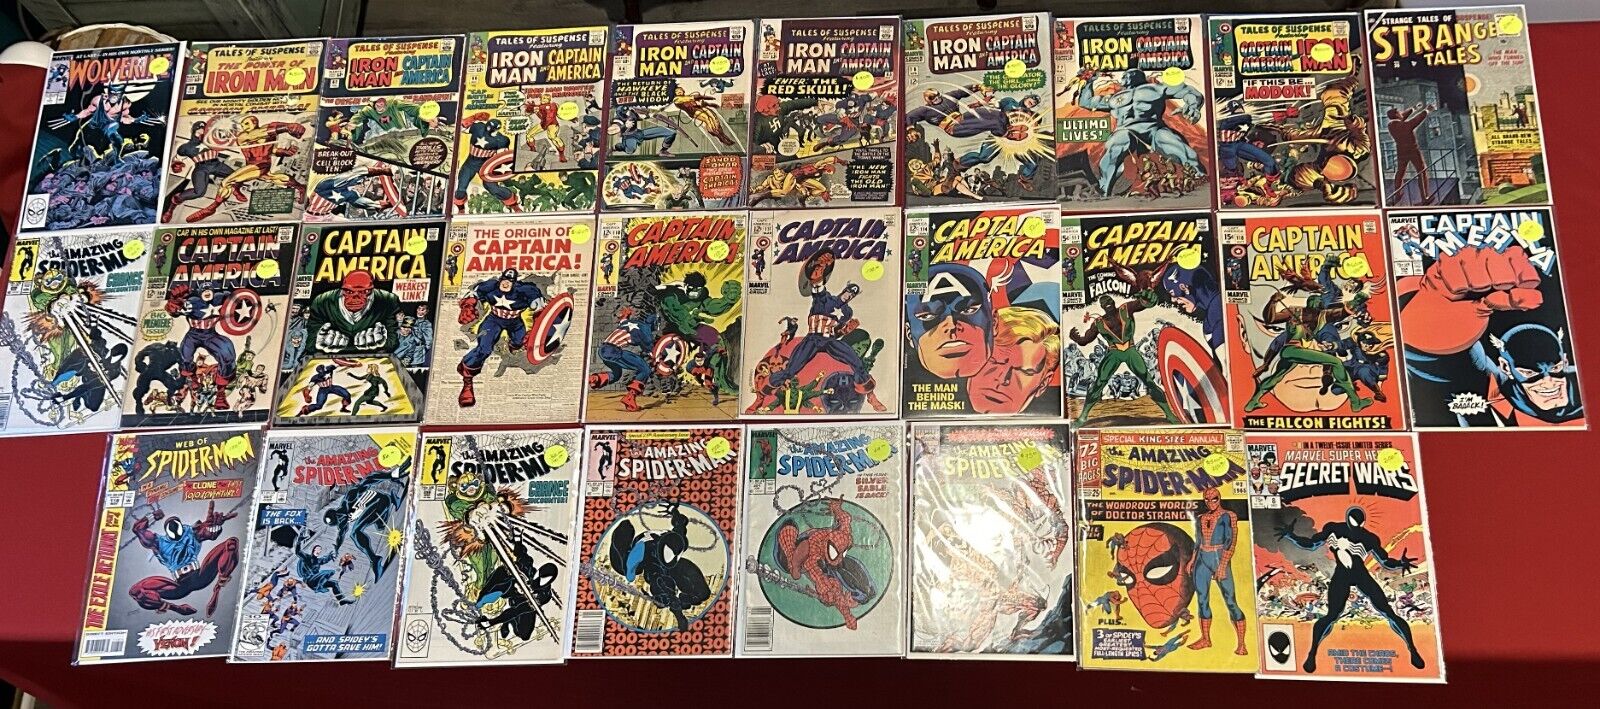 Exceptional Comic Book Collection - 2,800 Books Dating Back to 1943.